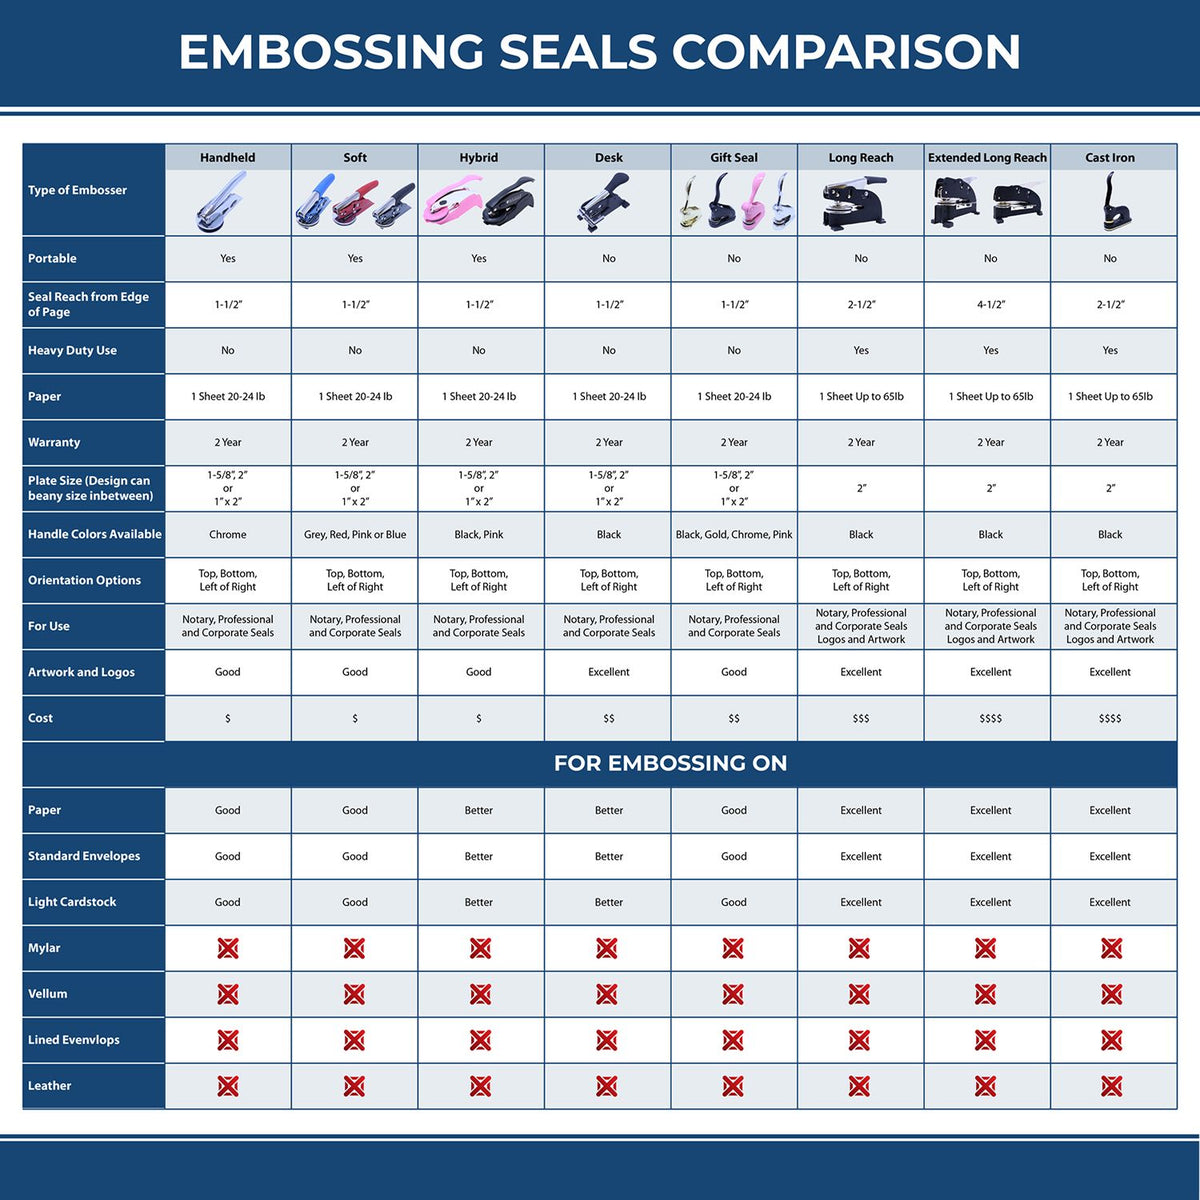 A comparison chart for the different types of mount models available for the Extended Long Reach District of Columbia Architect Seal Embosser.